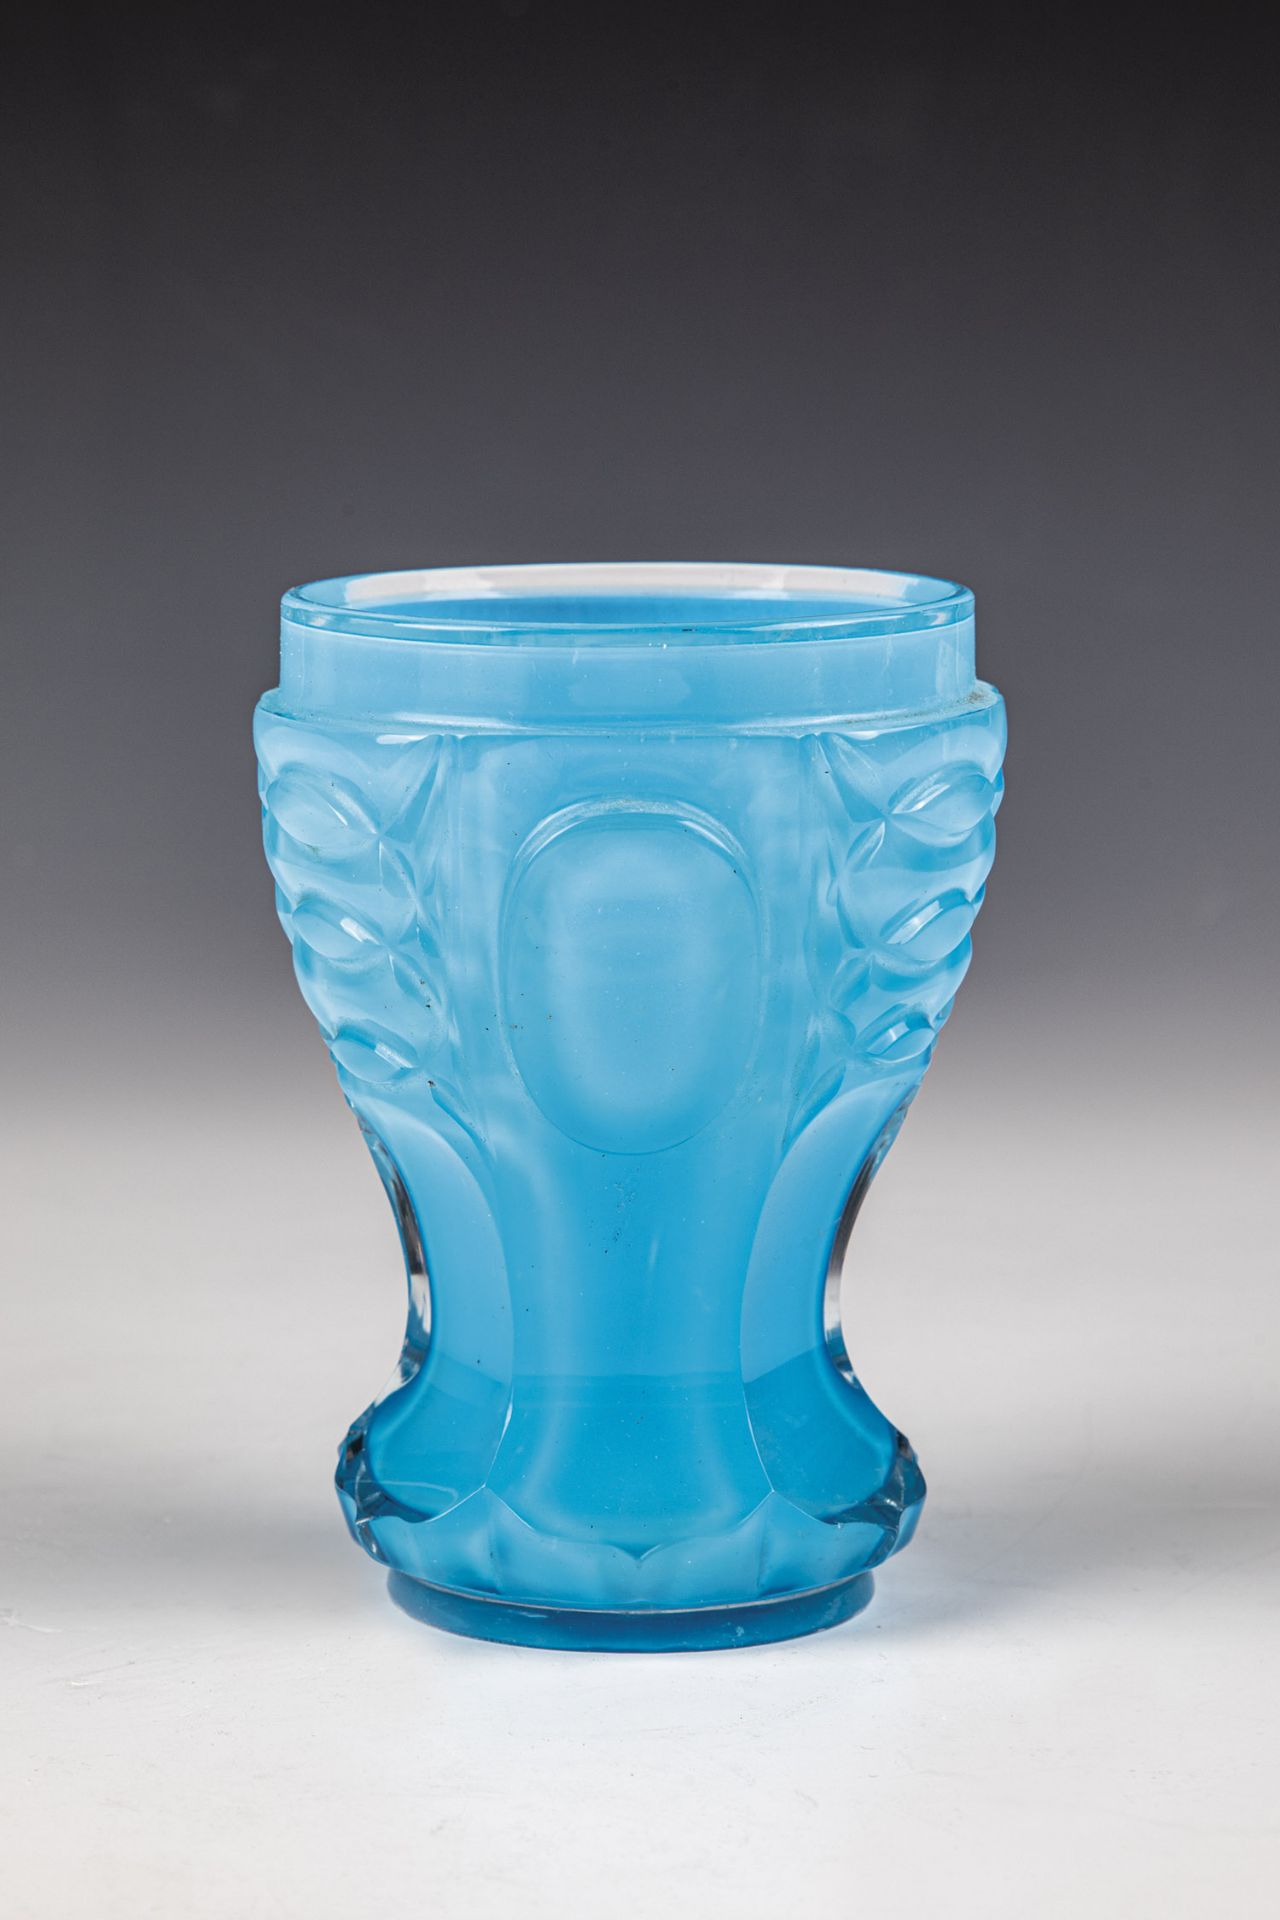 Foot cup Bohemia, M. 19 c. Colourless glass with light blue, opalescent underlay. Stand with